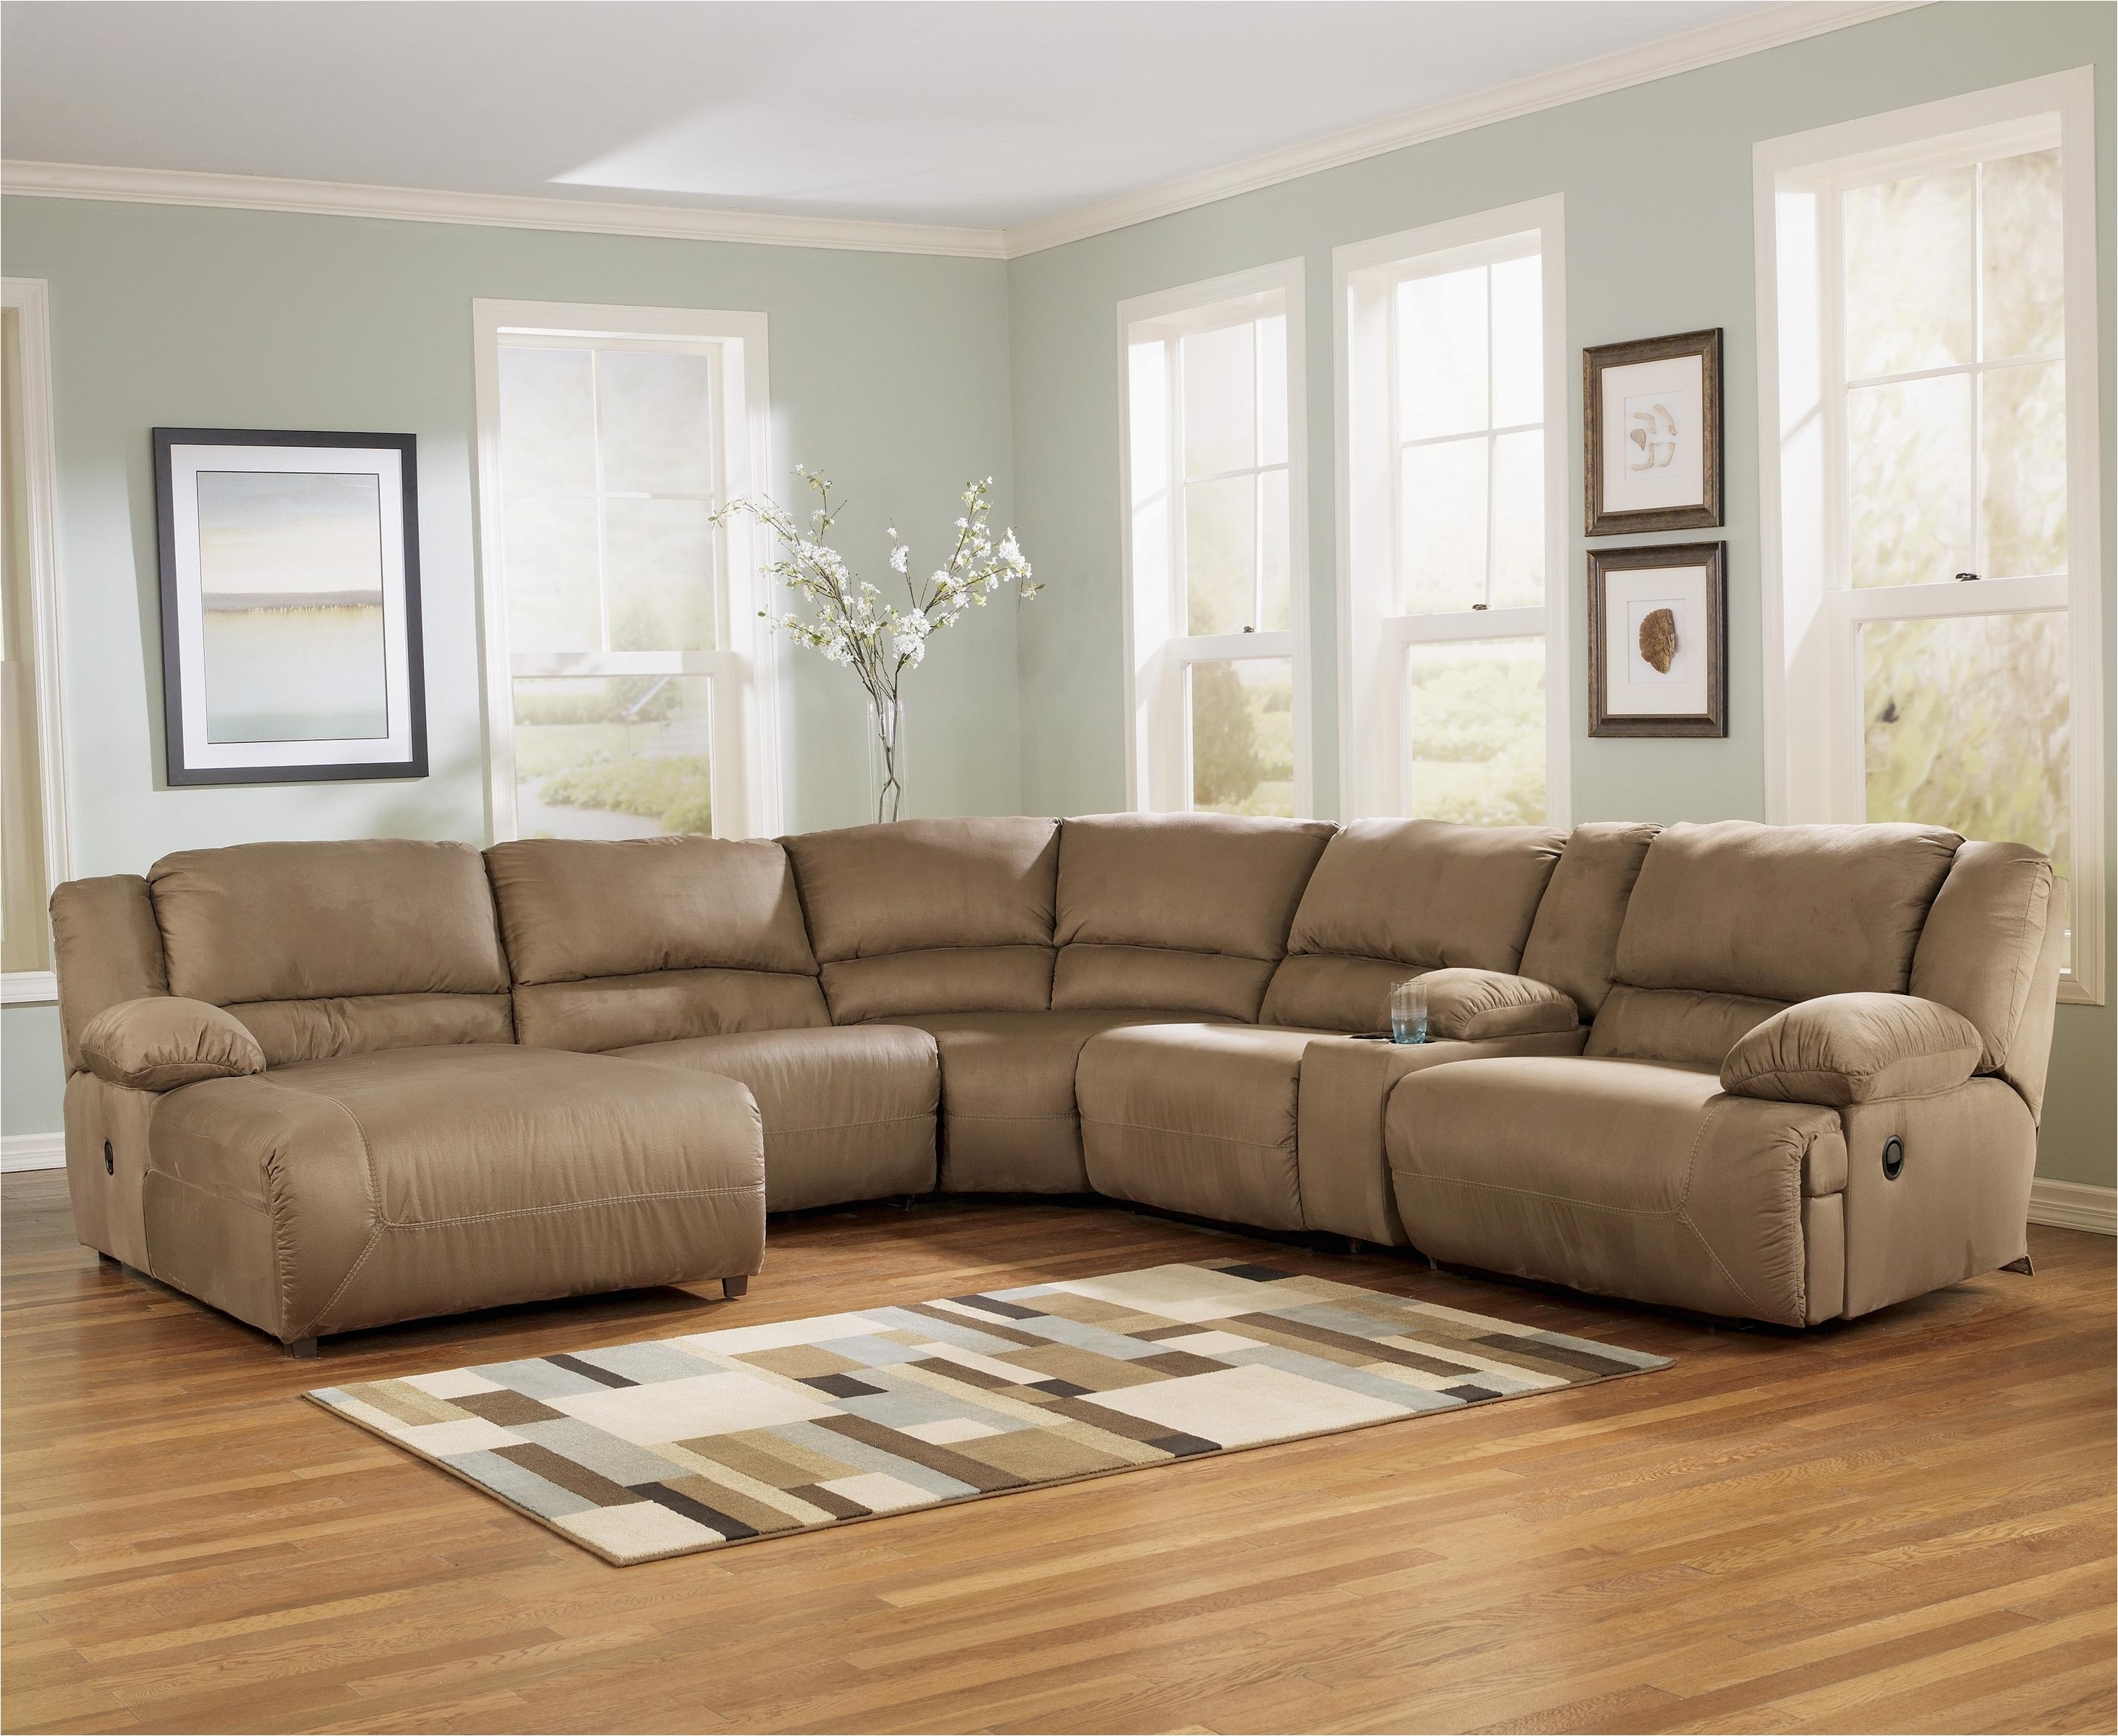 discount furniture birmingham al awesome 20 s sectional sofas at birmingham al photograph of discount furniture